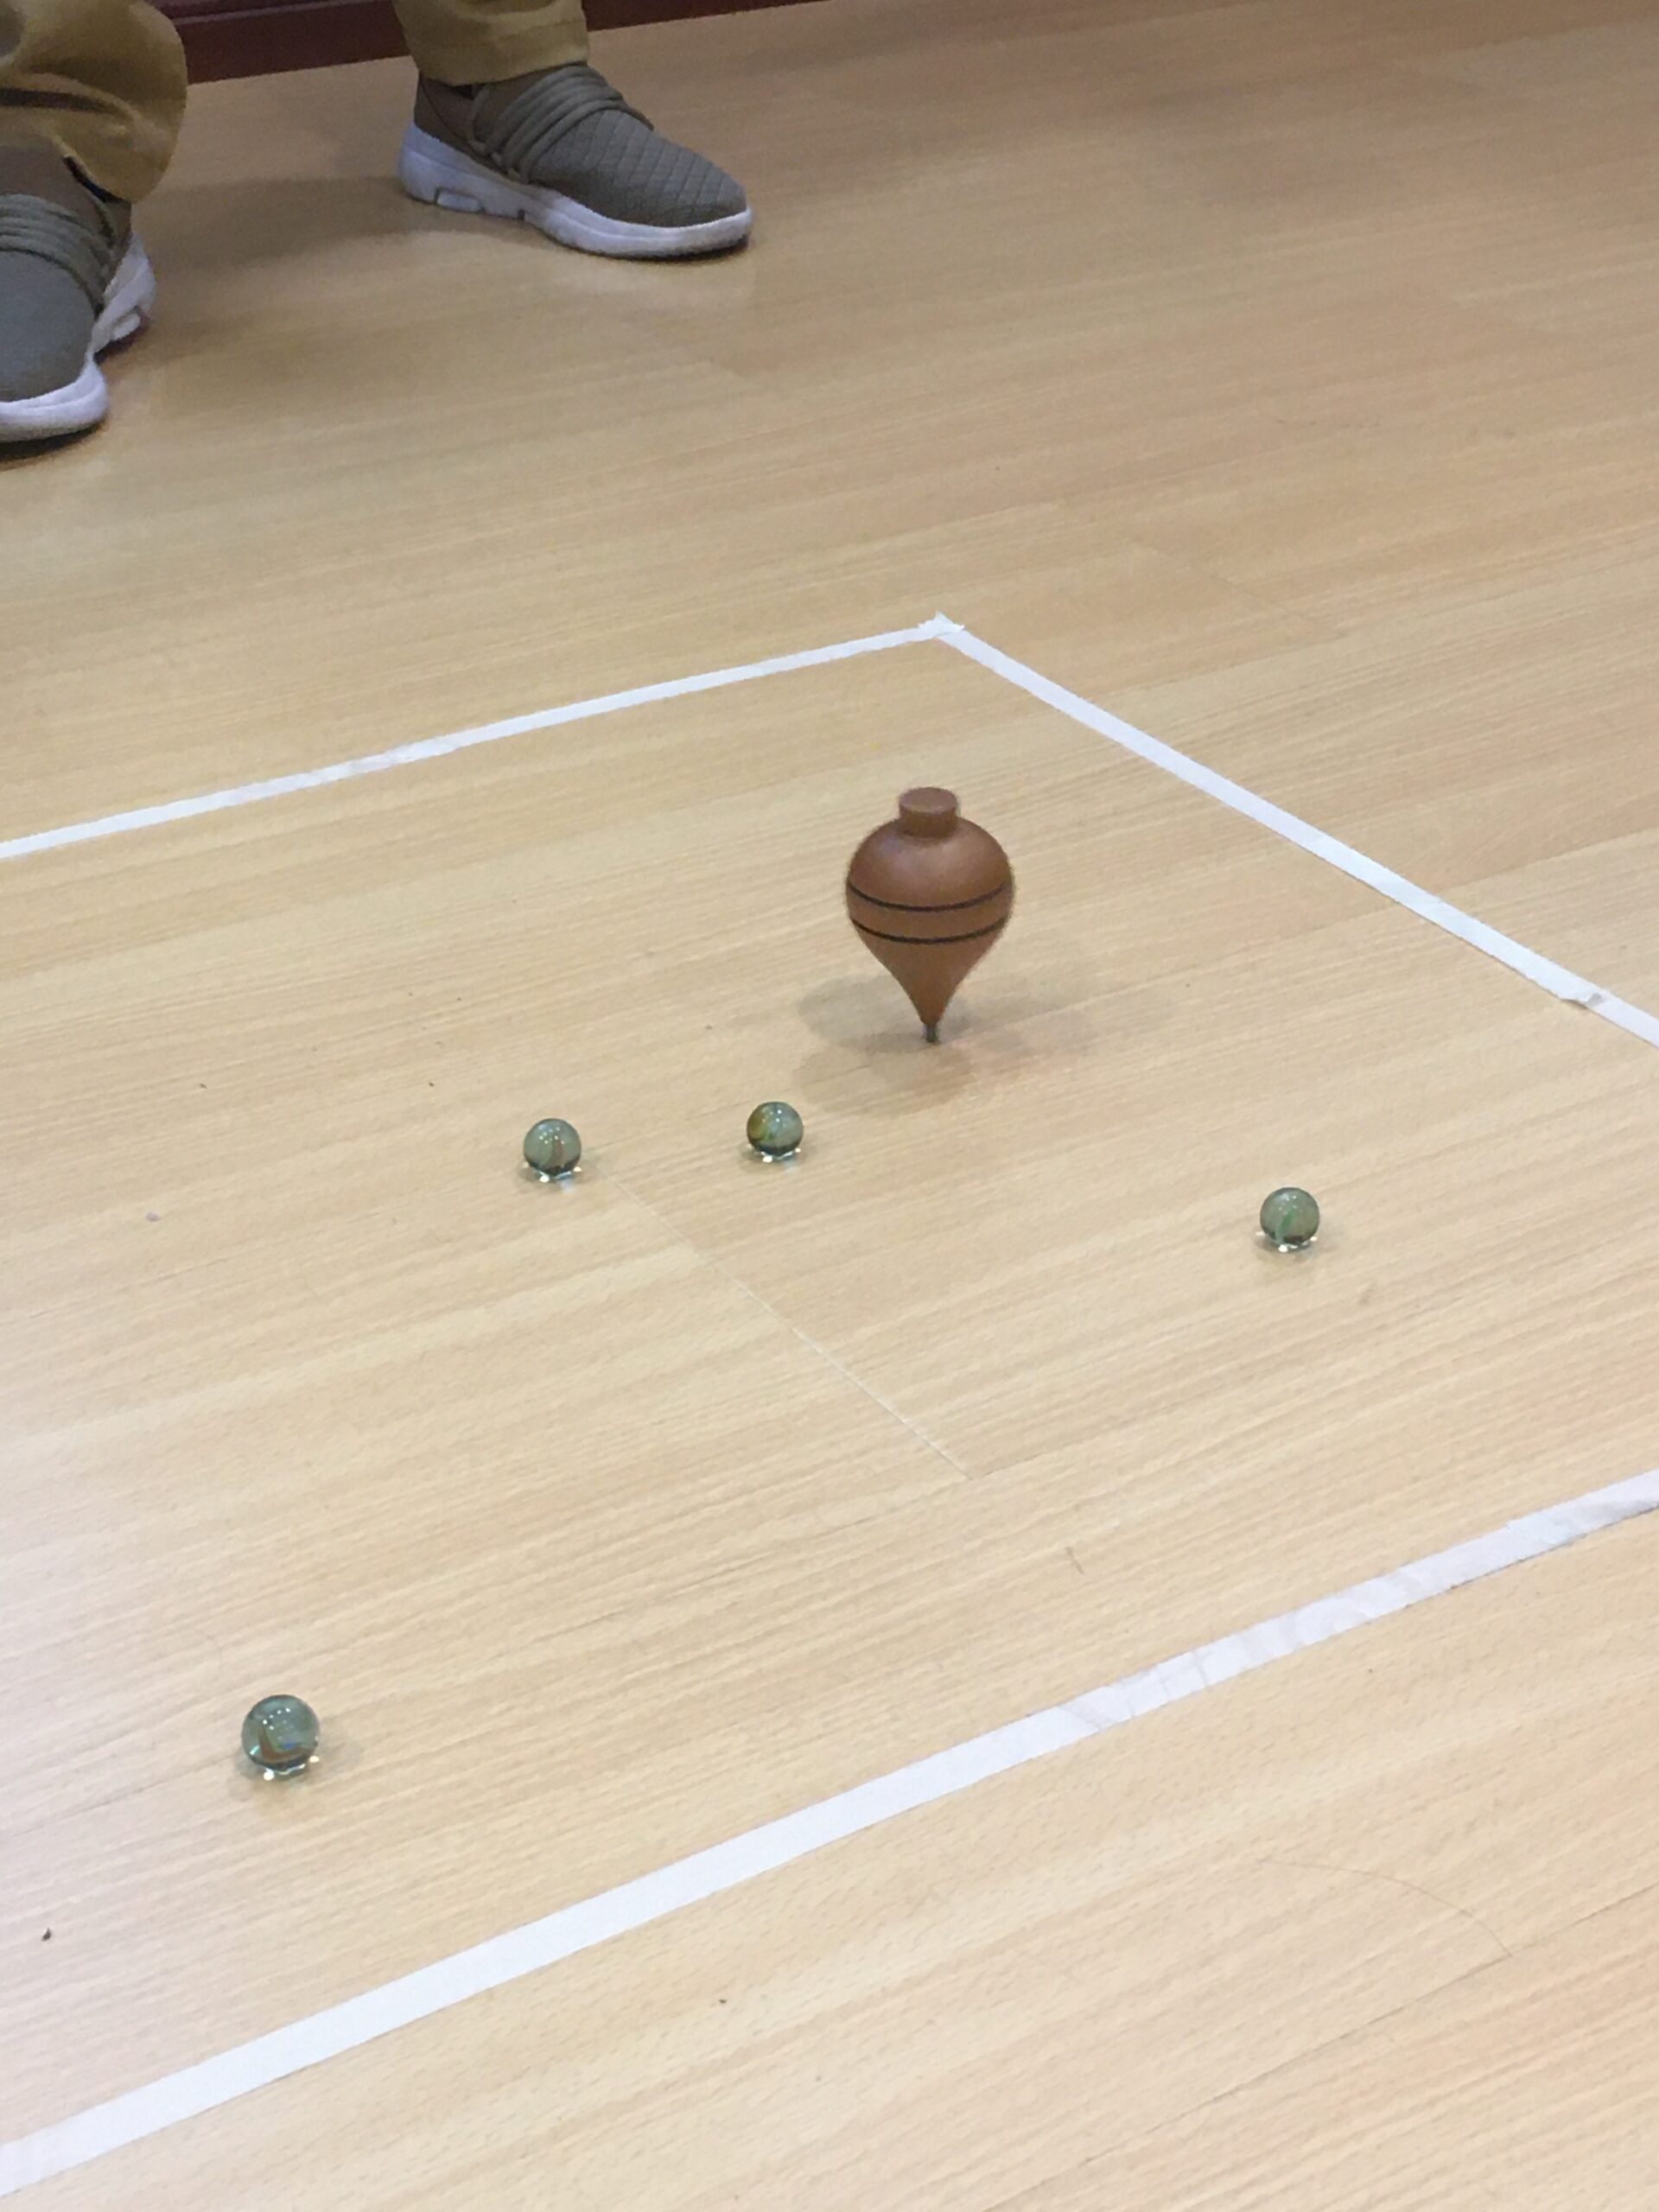 Pictured here are marbles and a wooden toy spinning on the floor. both the marbles and wooden toy and within a square, which was made by white tape. 